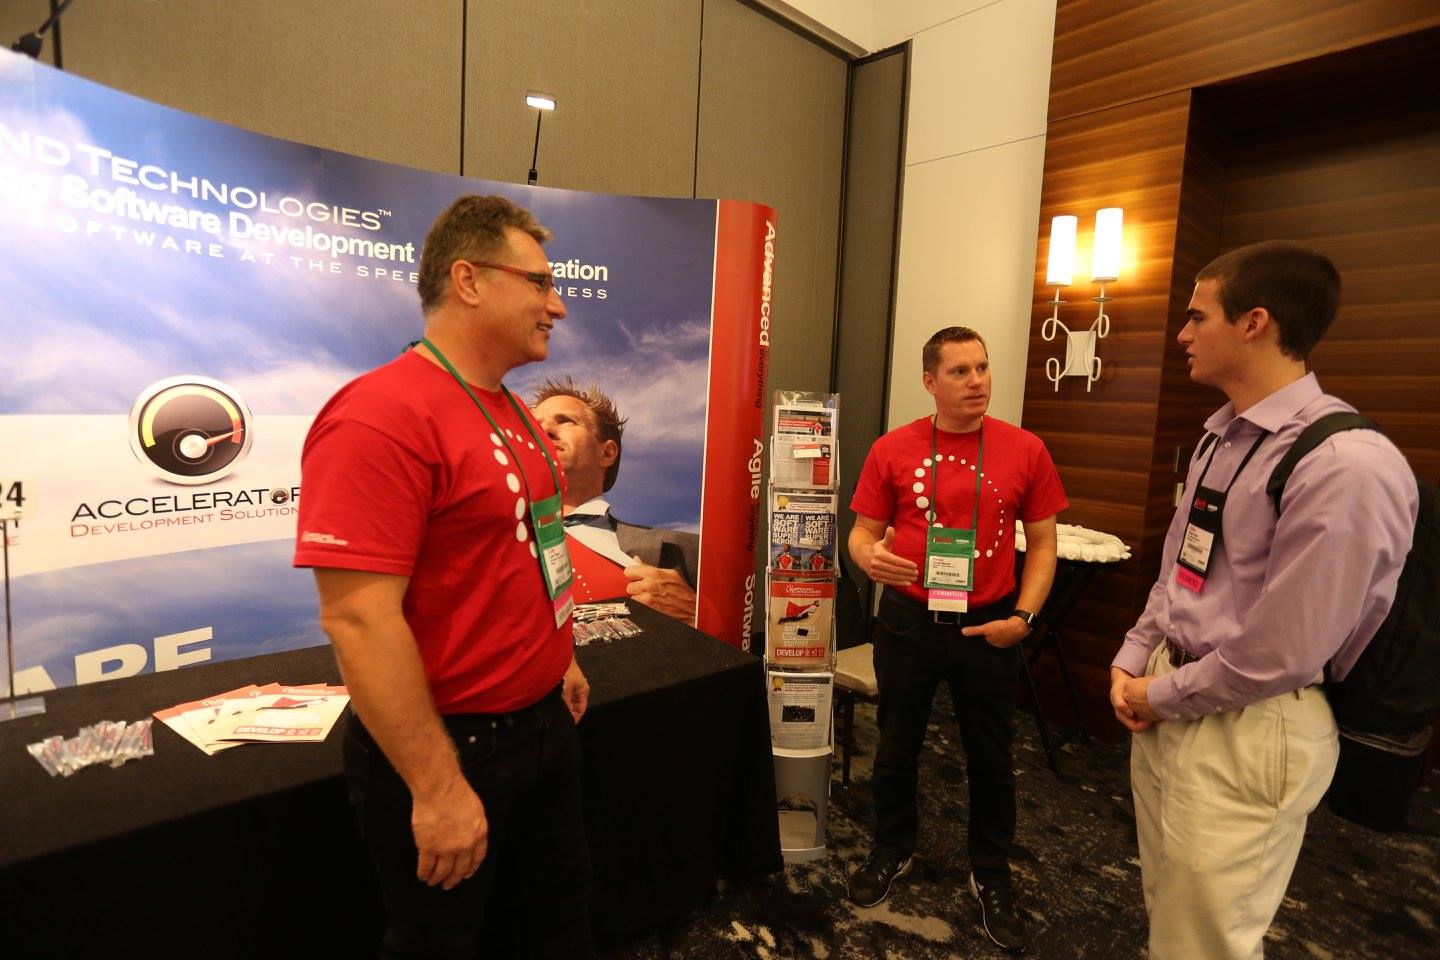 Lee and Derek talk with an attendee at the conference expo.